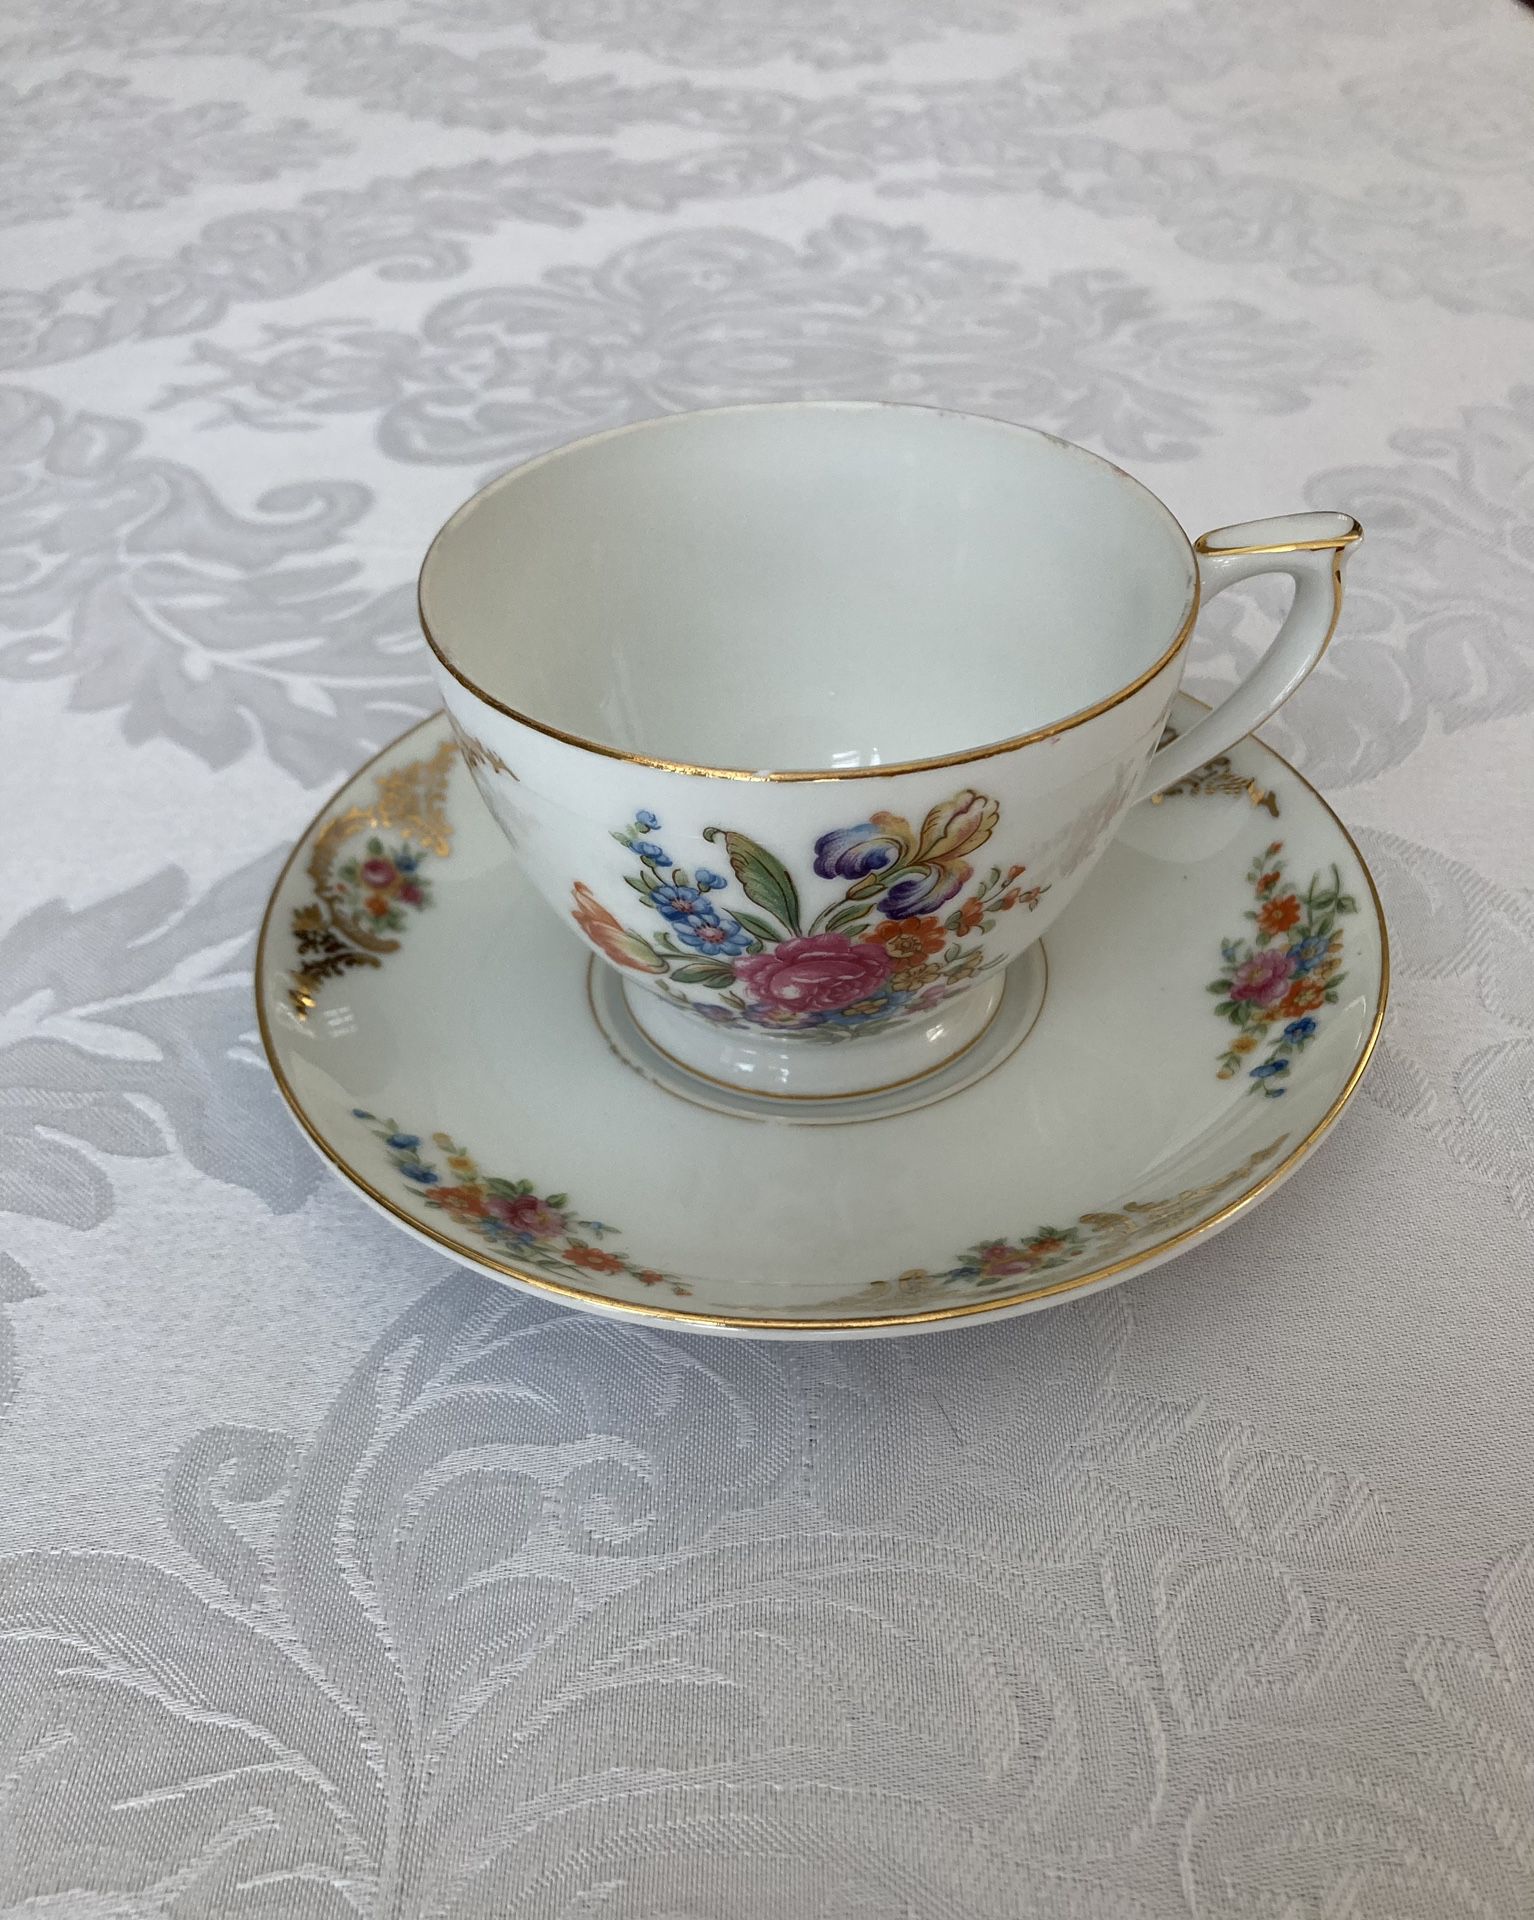 Aichi China Japan Floral Bouquet Tea Cup & Saucer Made in Occupied Japan